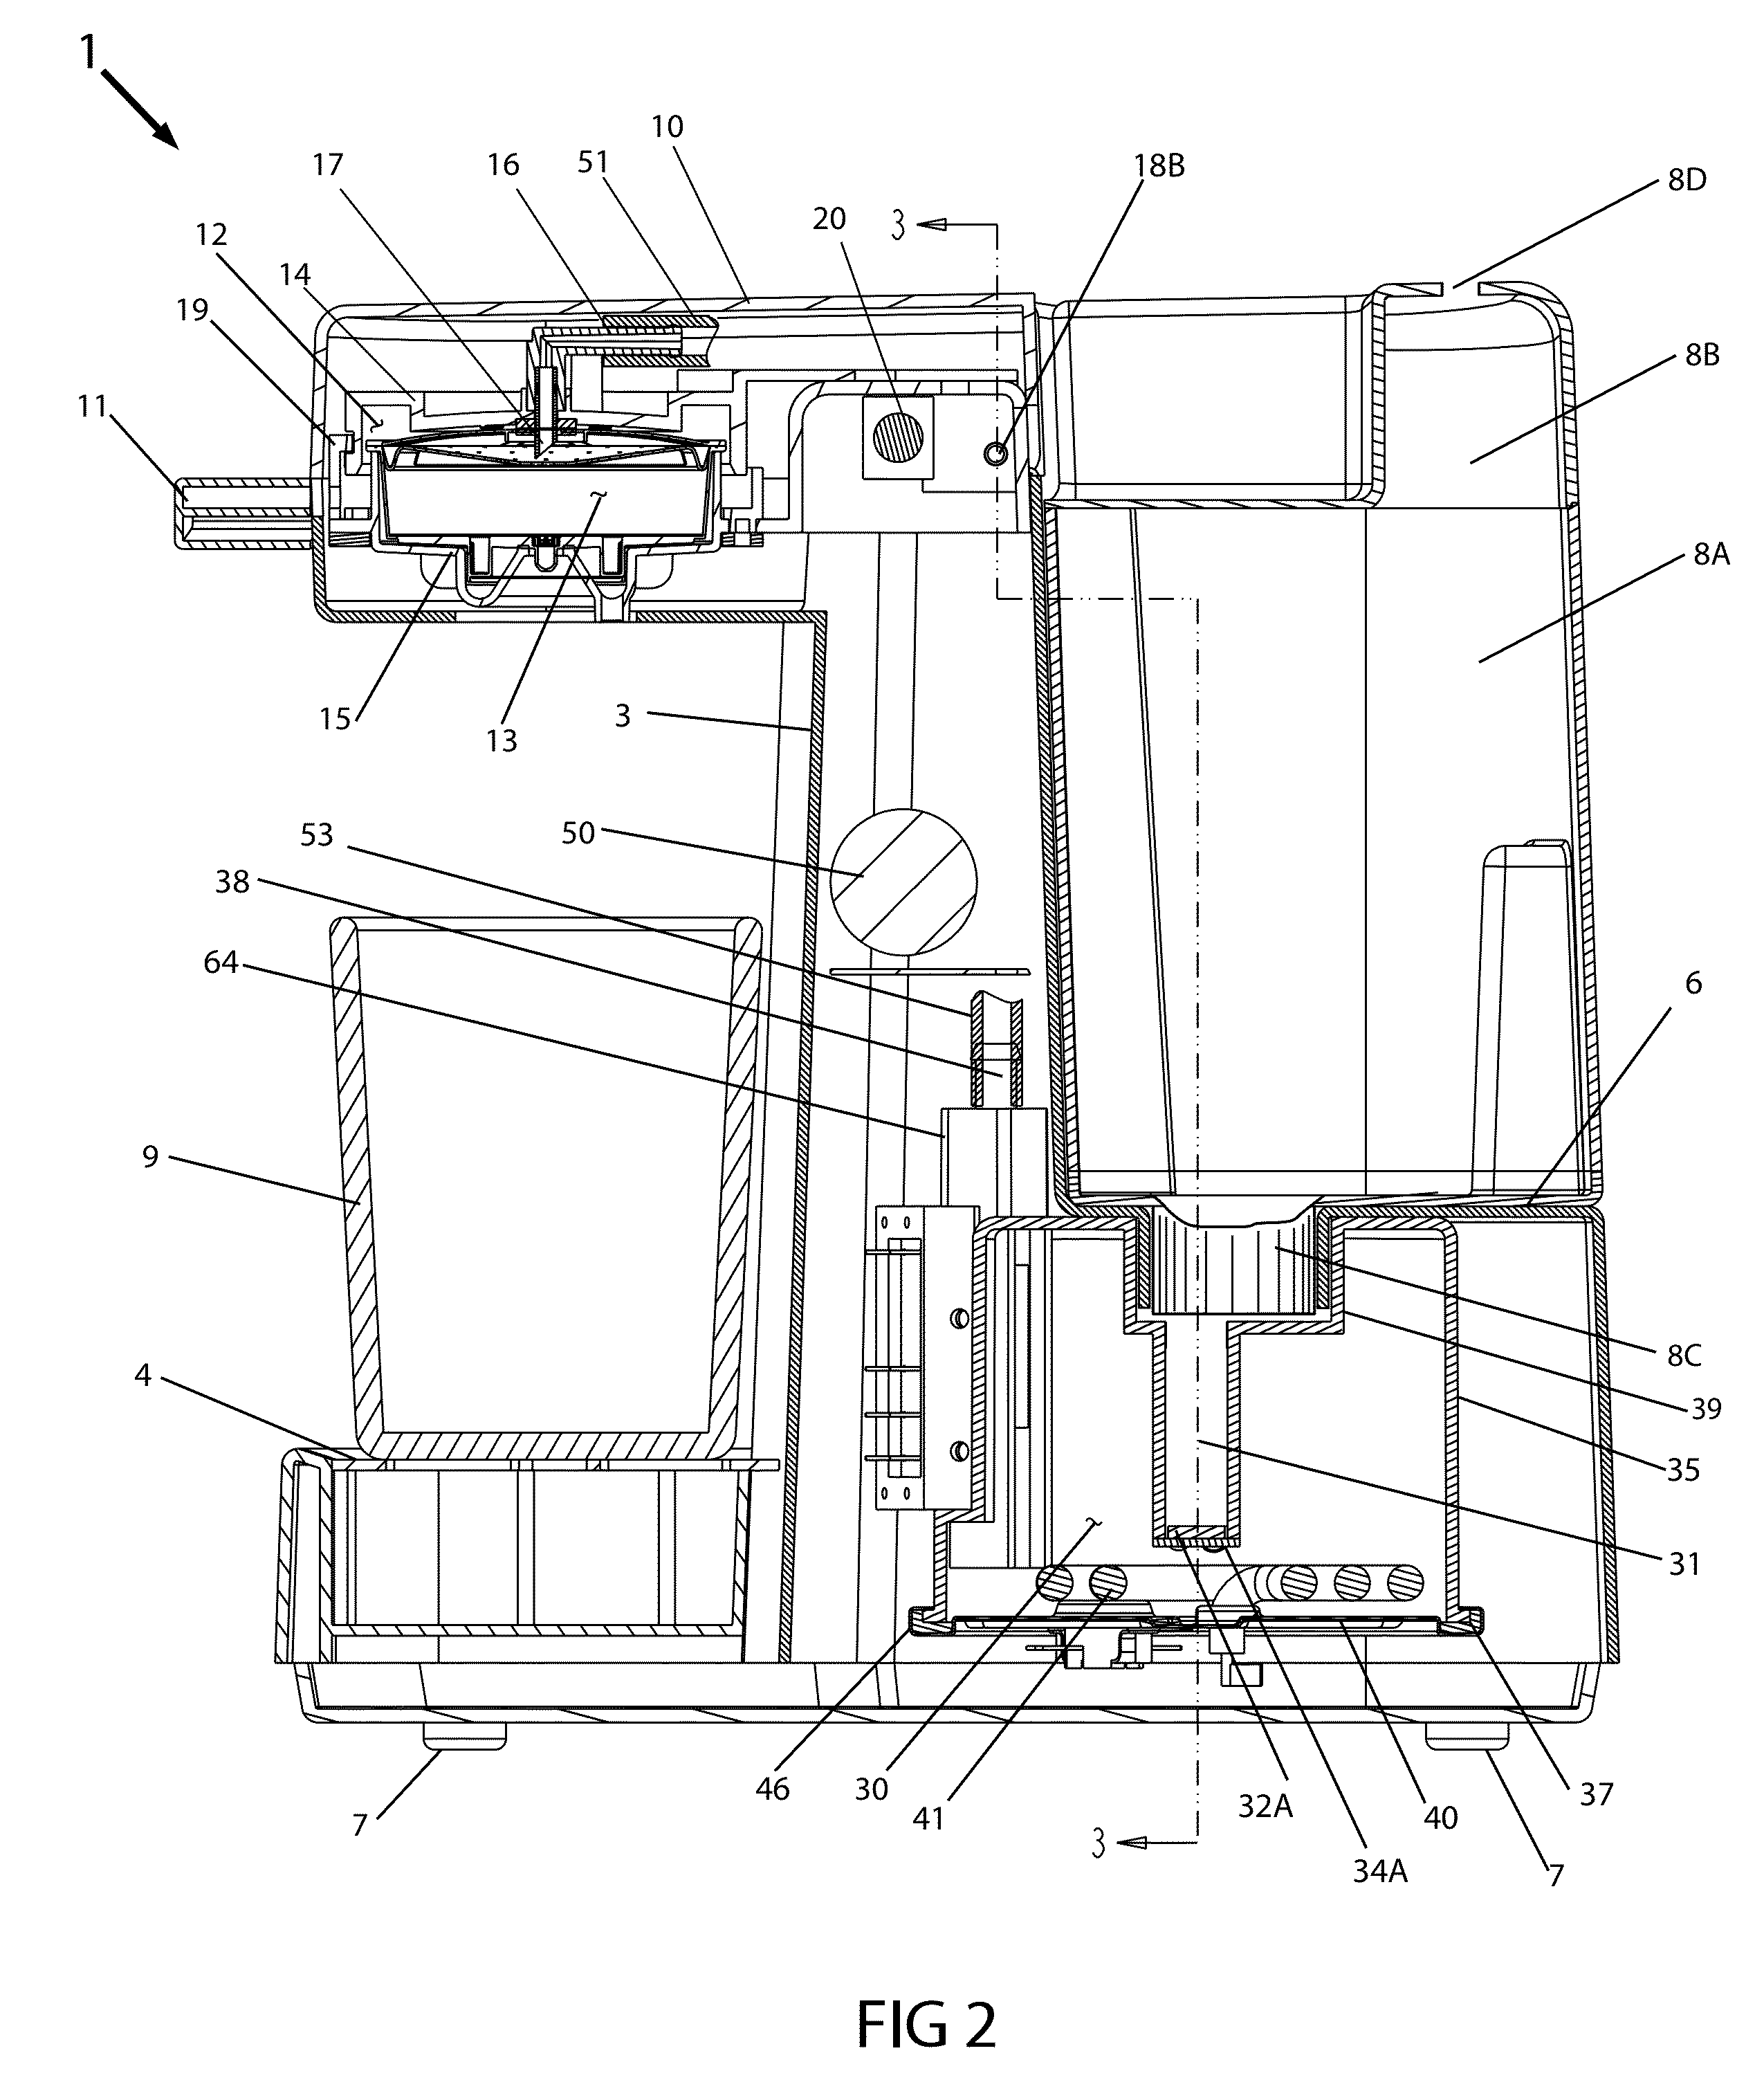 Apparatus and method for infusing hot beverages